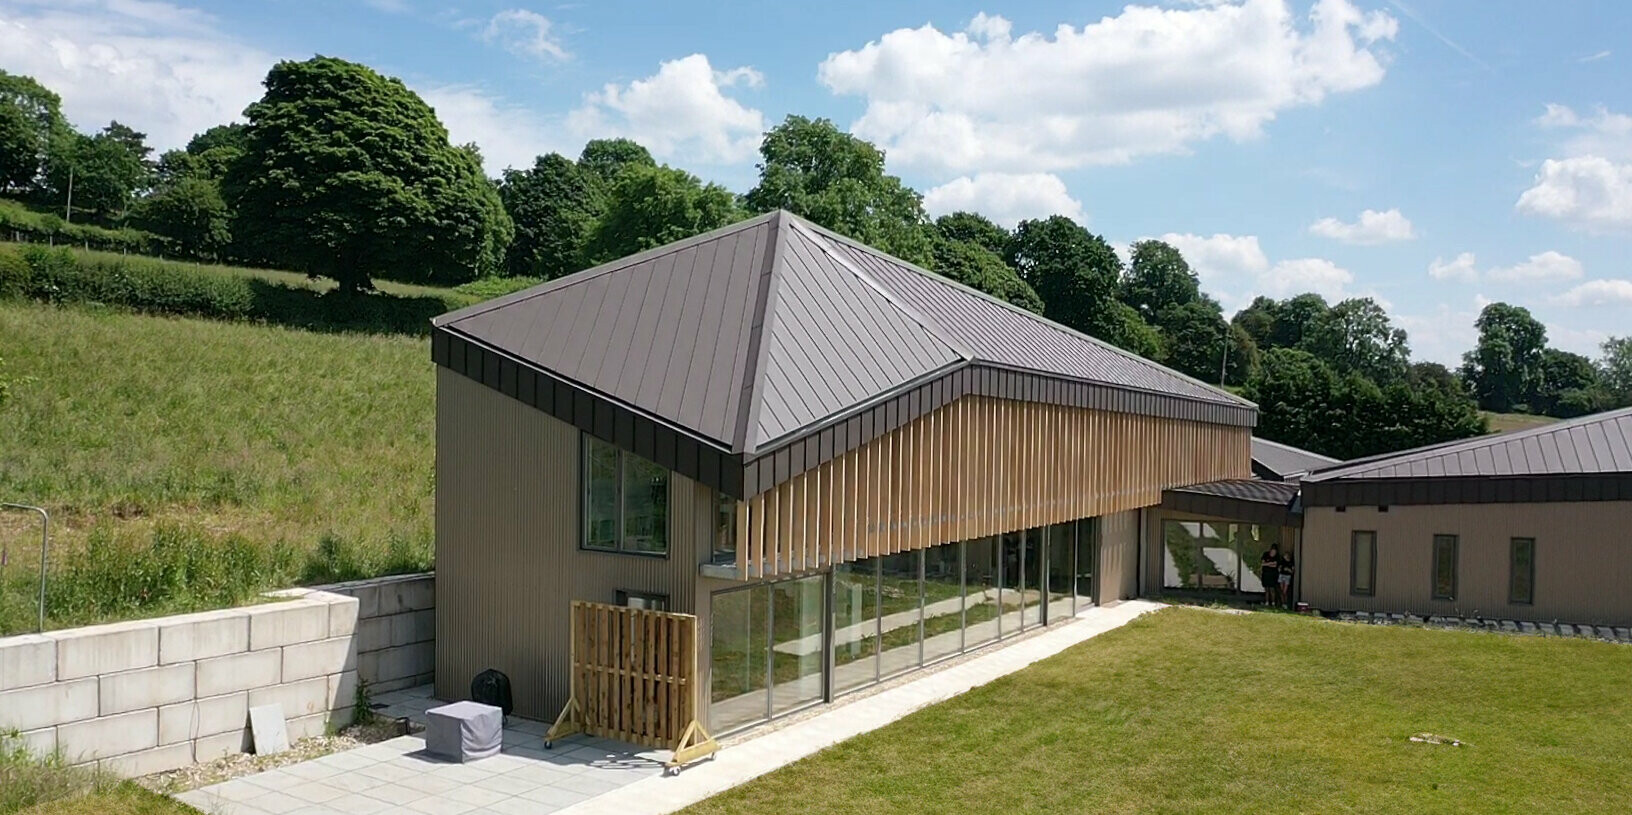 Oblique view of a longhouse with a standing seam roof made of aluminium in brown